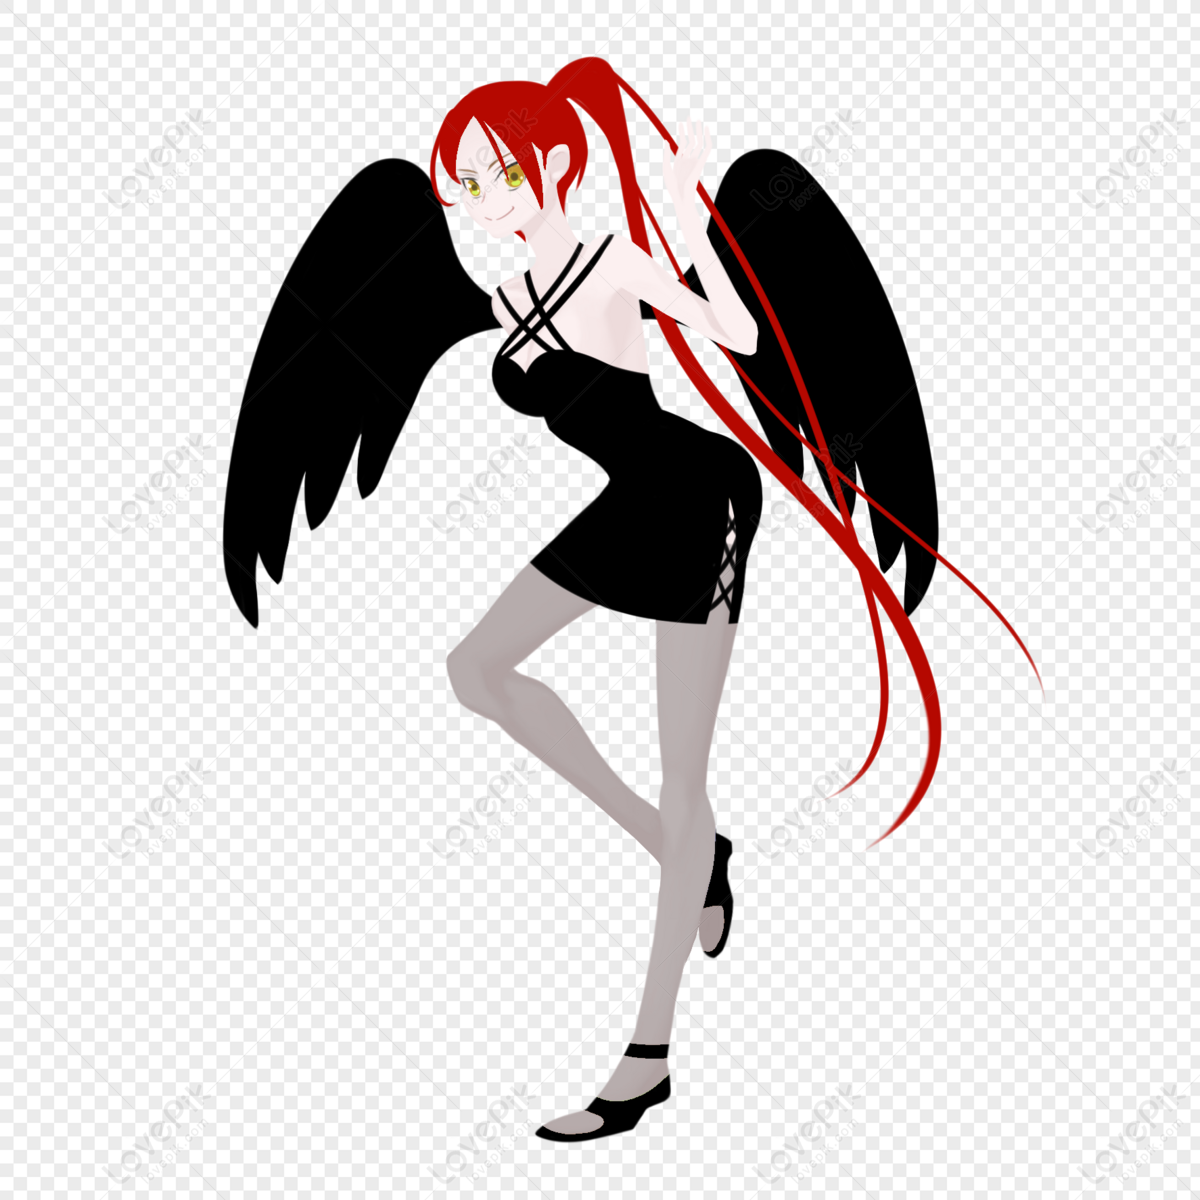 Red Demon Wings Illustration PNG Images